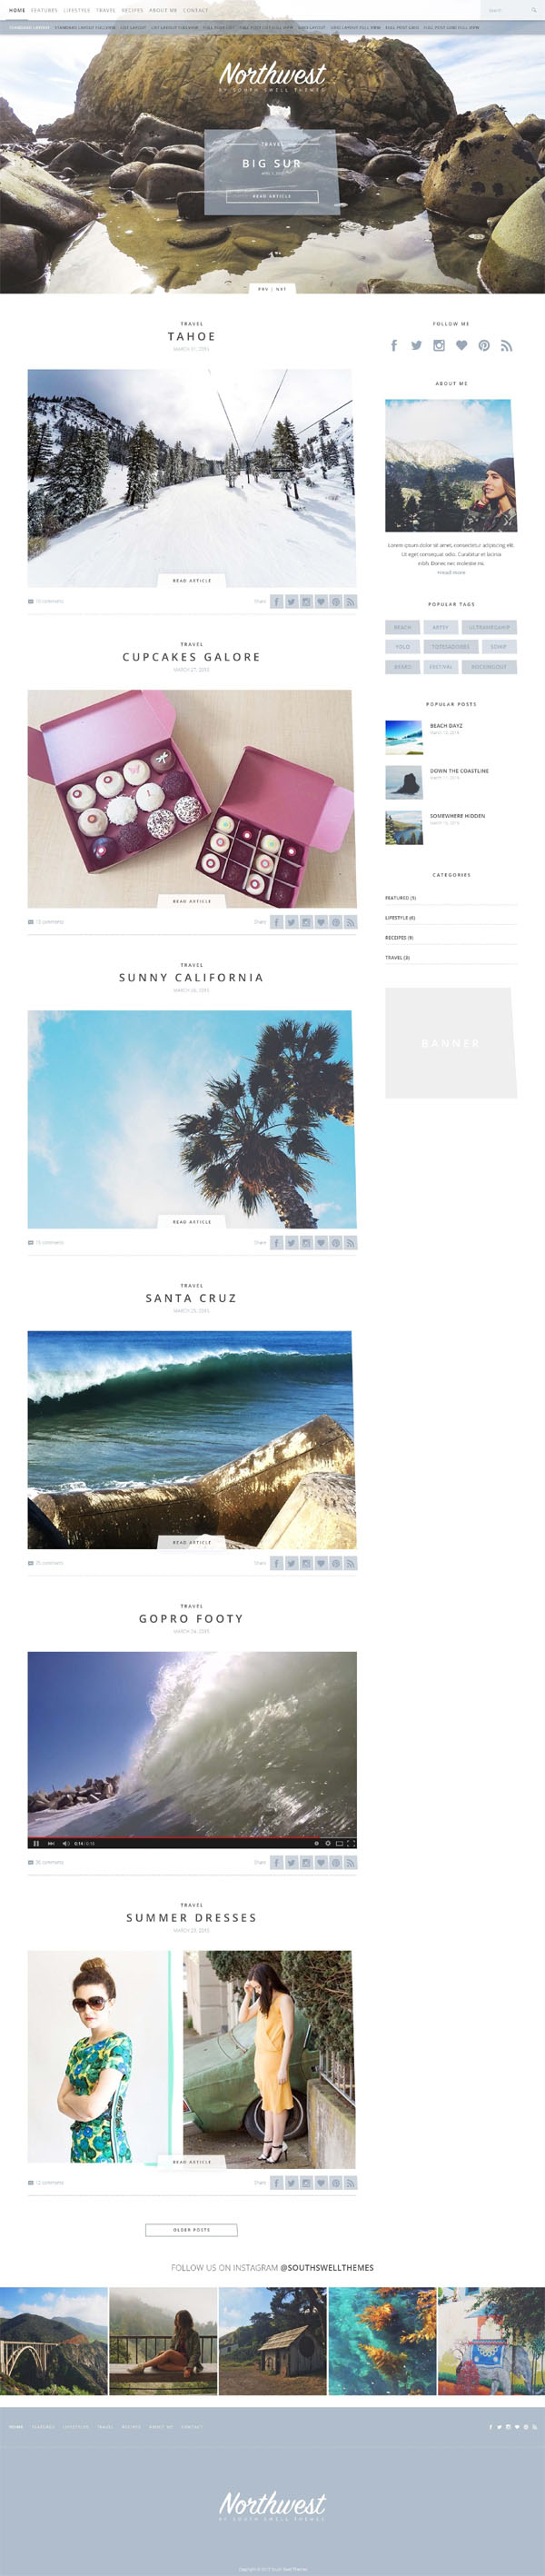 NorthWest - A Simple Blog HTML Template